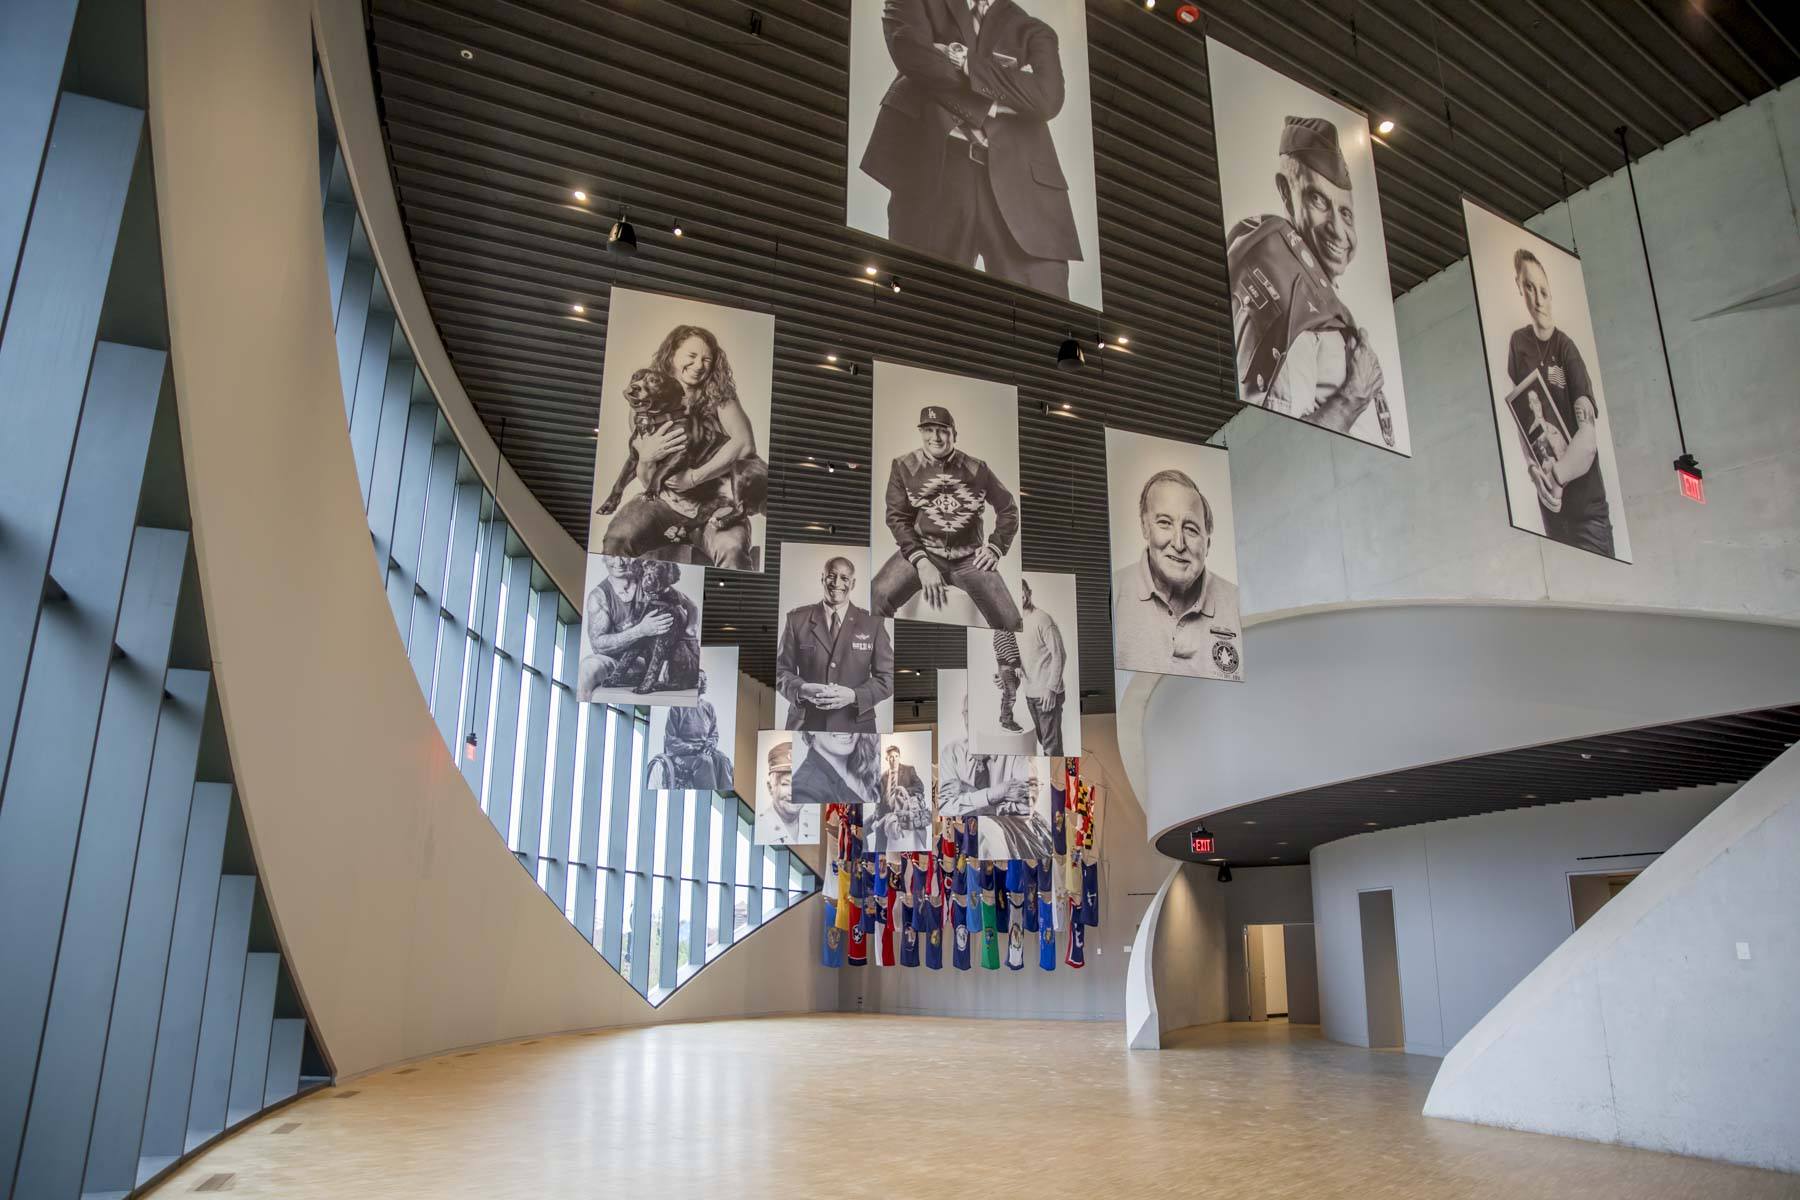 The inside of the new National Veterans Memorial and Museum.